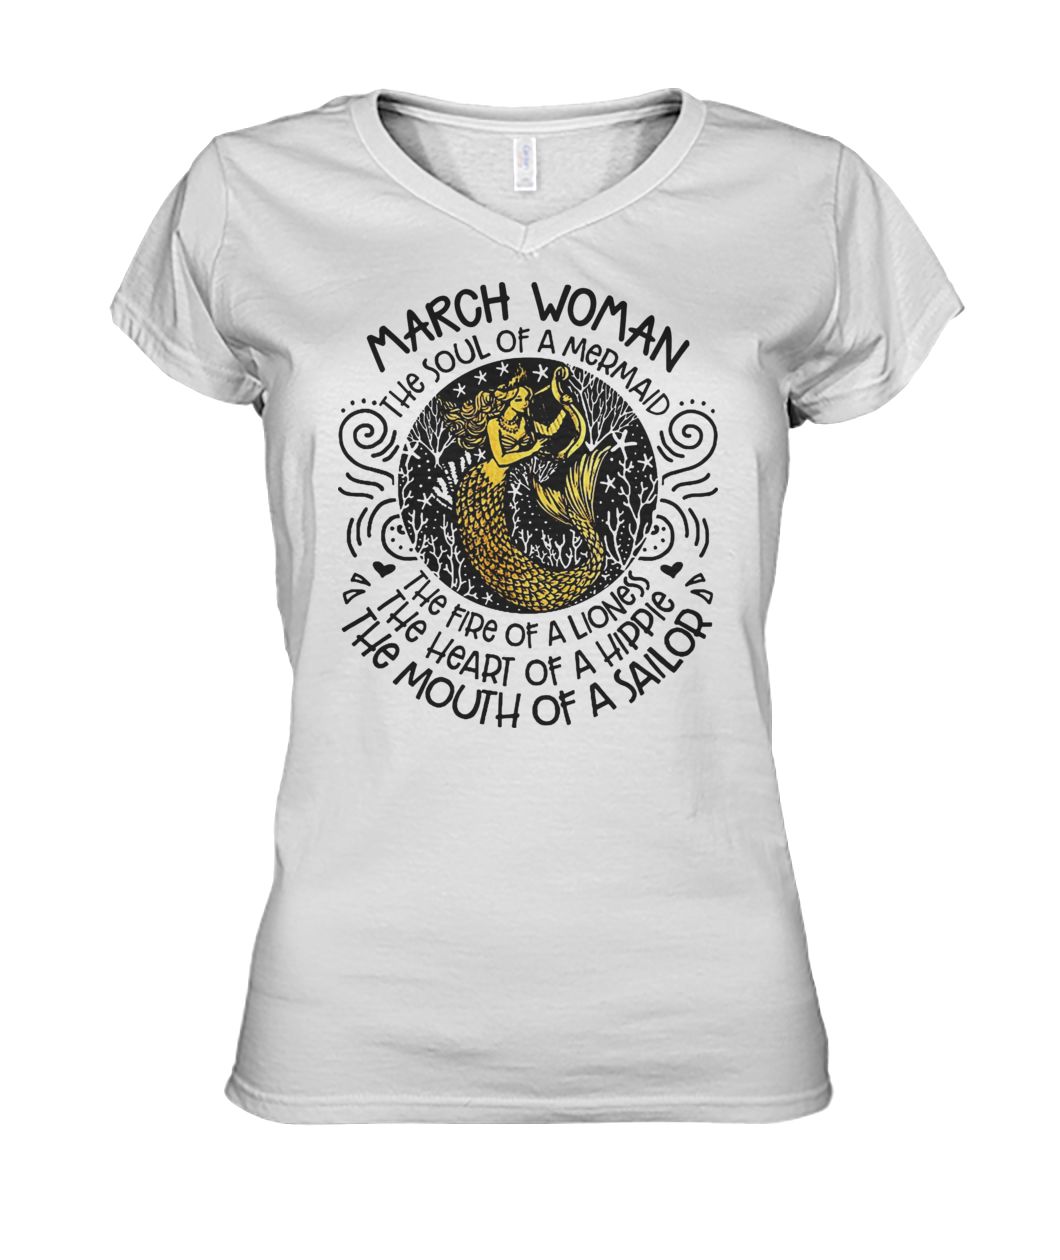 March girl the soul of a mermaid the fire of a lioness women's v-neck